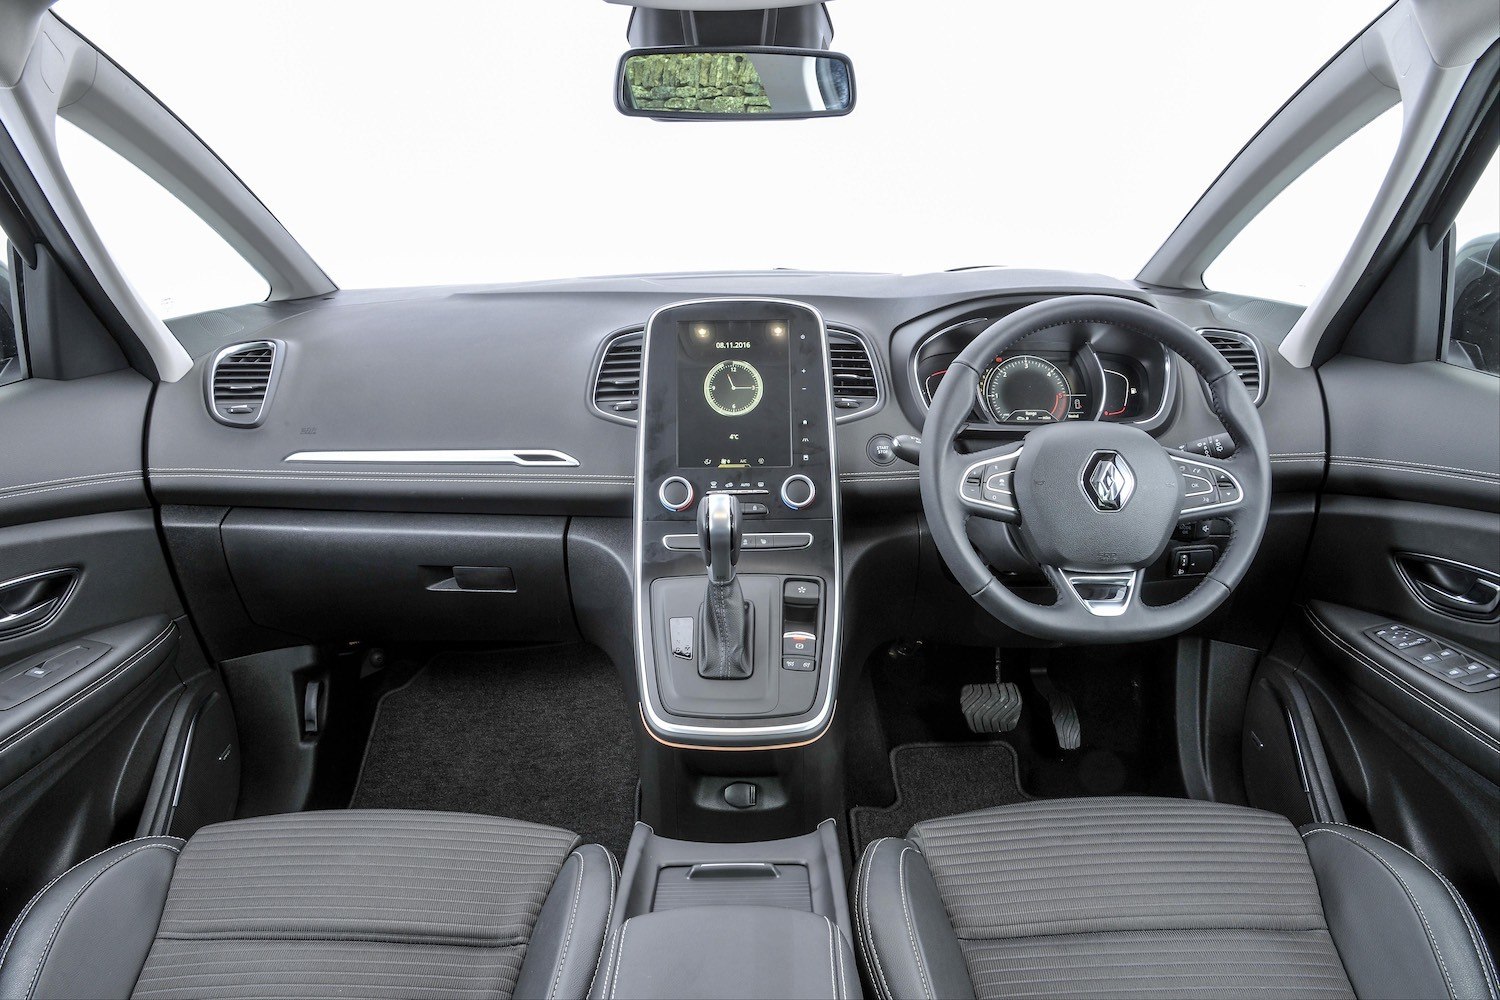 Neil Lyndon reviews the lates Renault Scenic for Drive 25